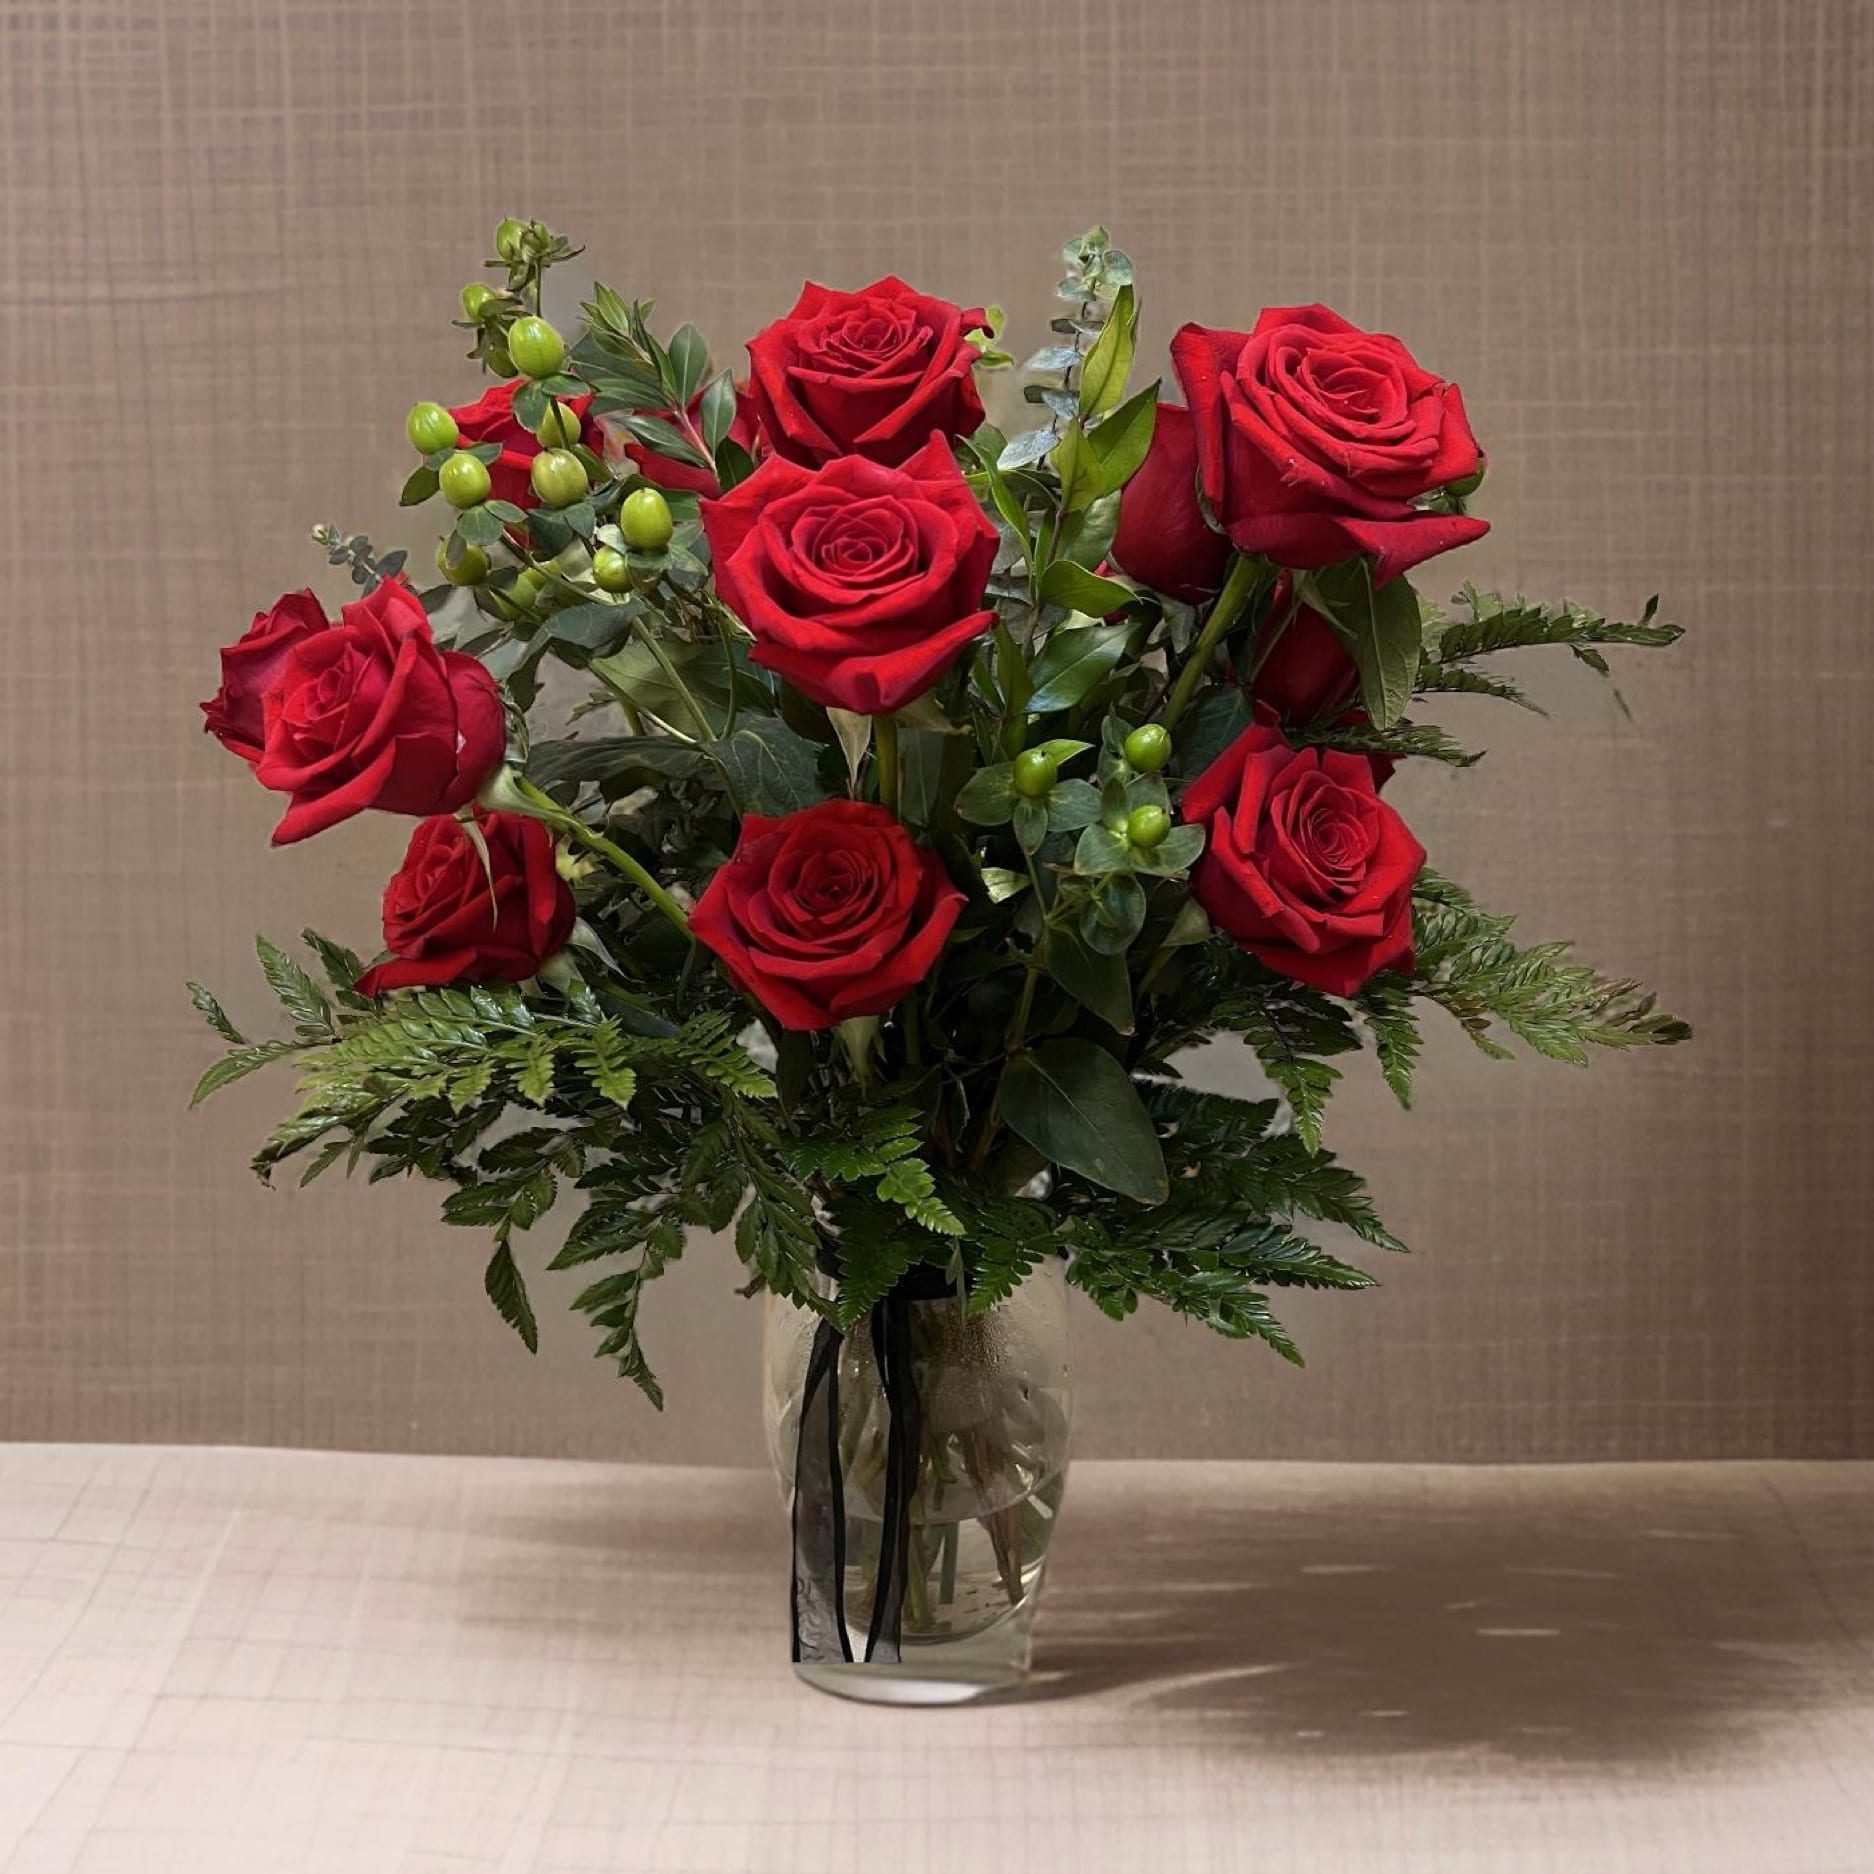 Classy - These dozen red roses are the classic romantic gift! Perfect for Valentine's Day or an Anniversary.   APPROXIMATE DIMENSIONS: 25&quot; H X 18&quot; W